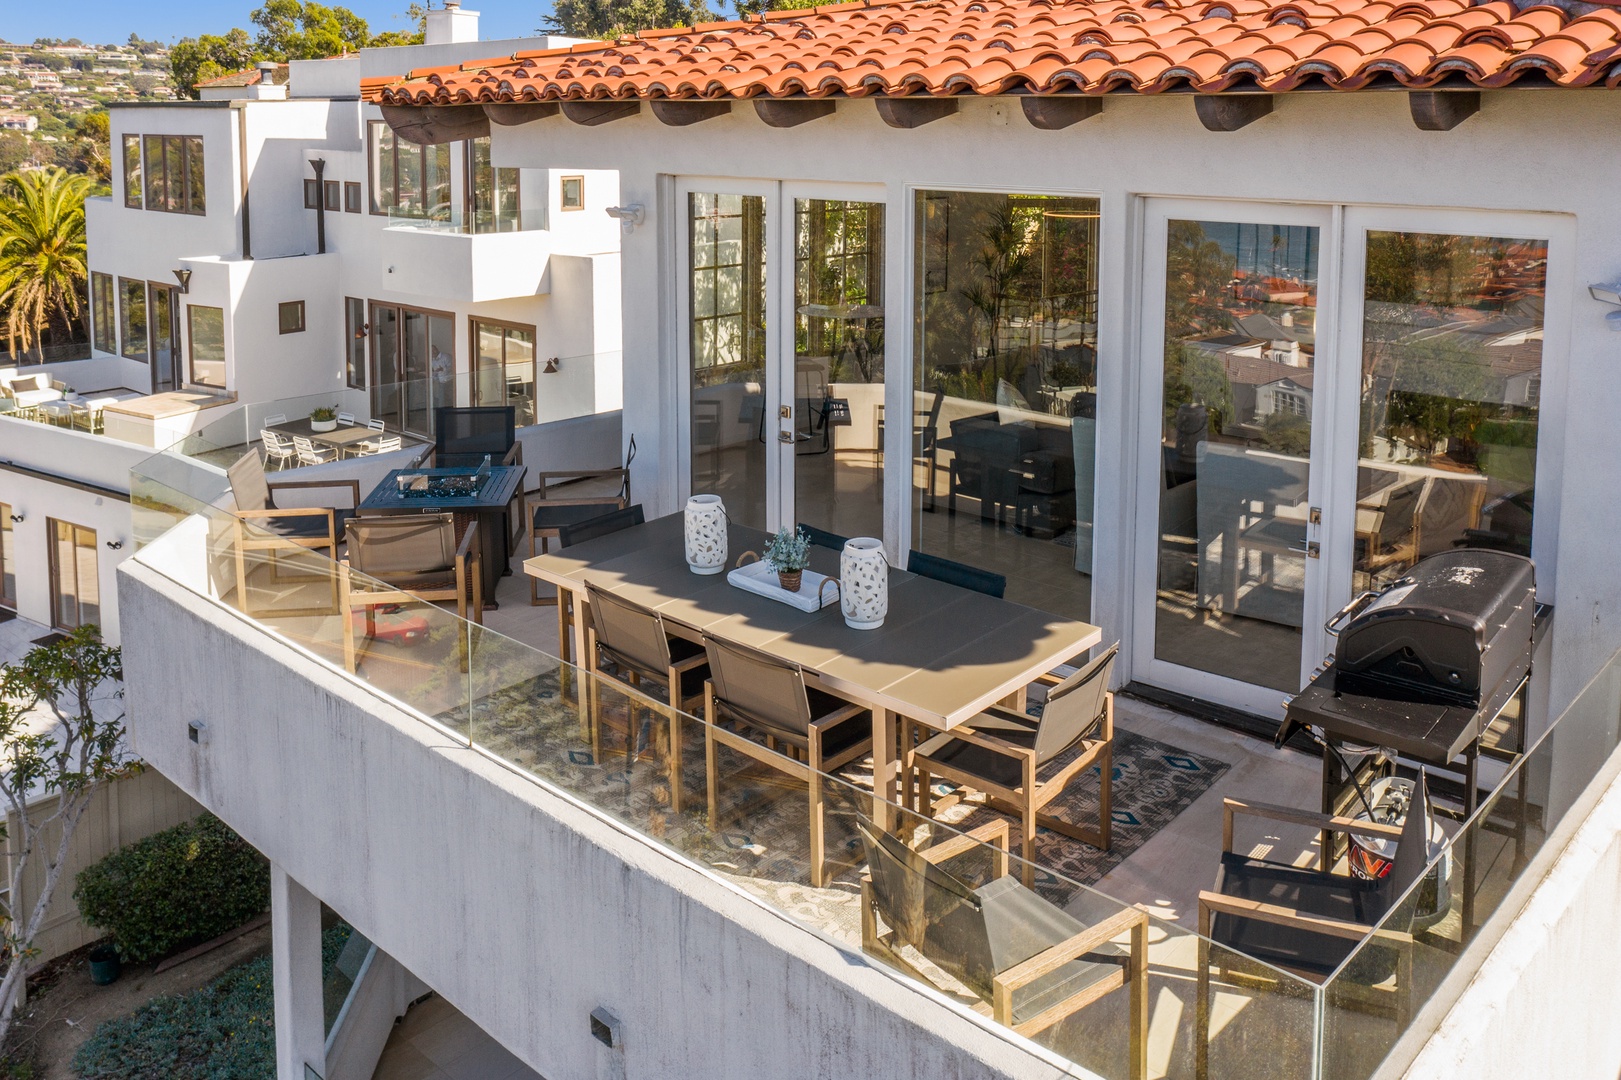 La Jolla Vacation Rentals, Coastal Lookout - Spacious upper view deck opens to formal living room with fire pit, BBQ and dining for 10